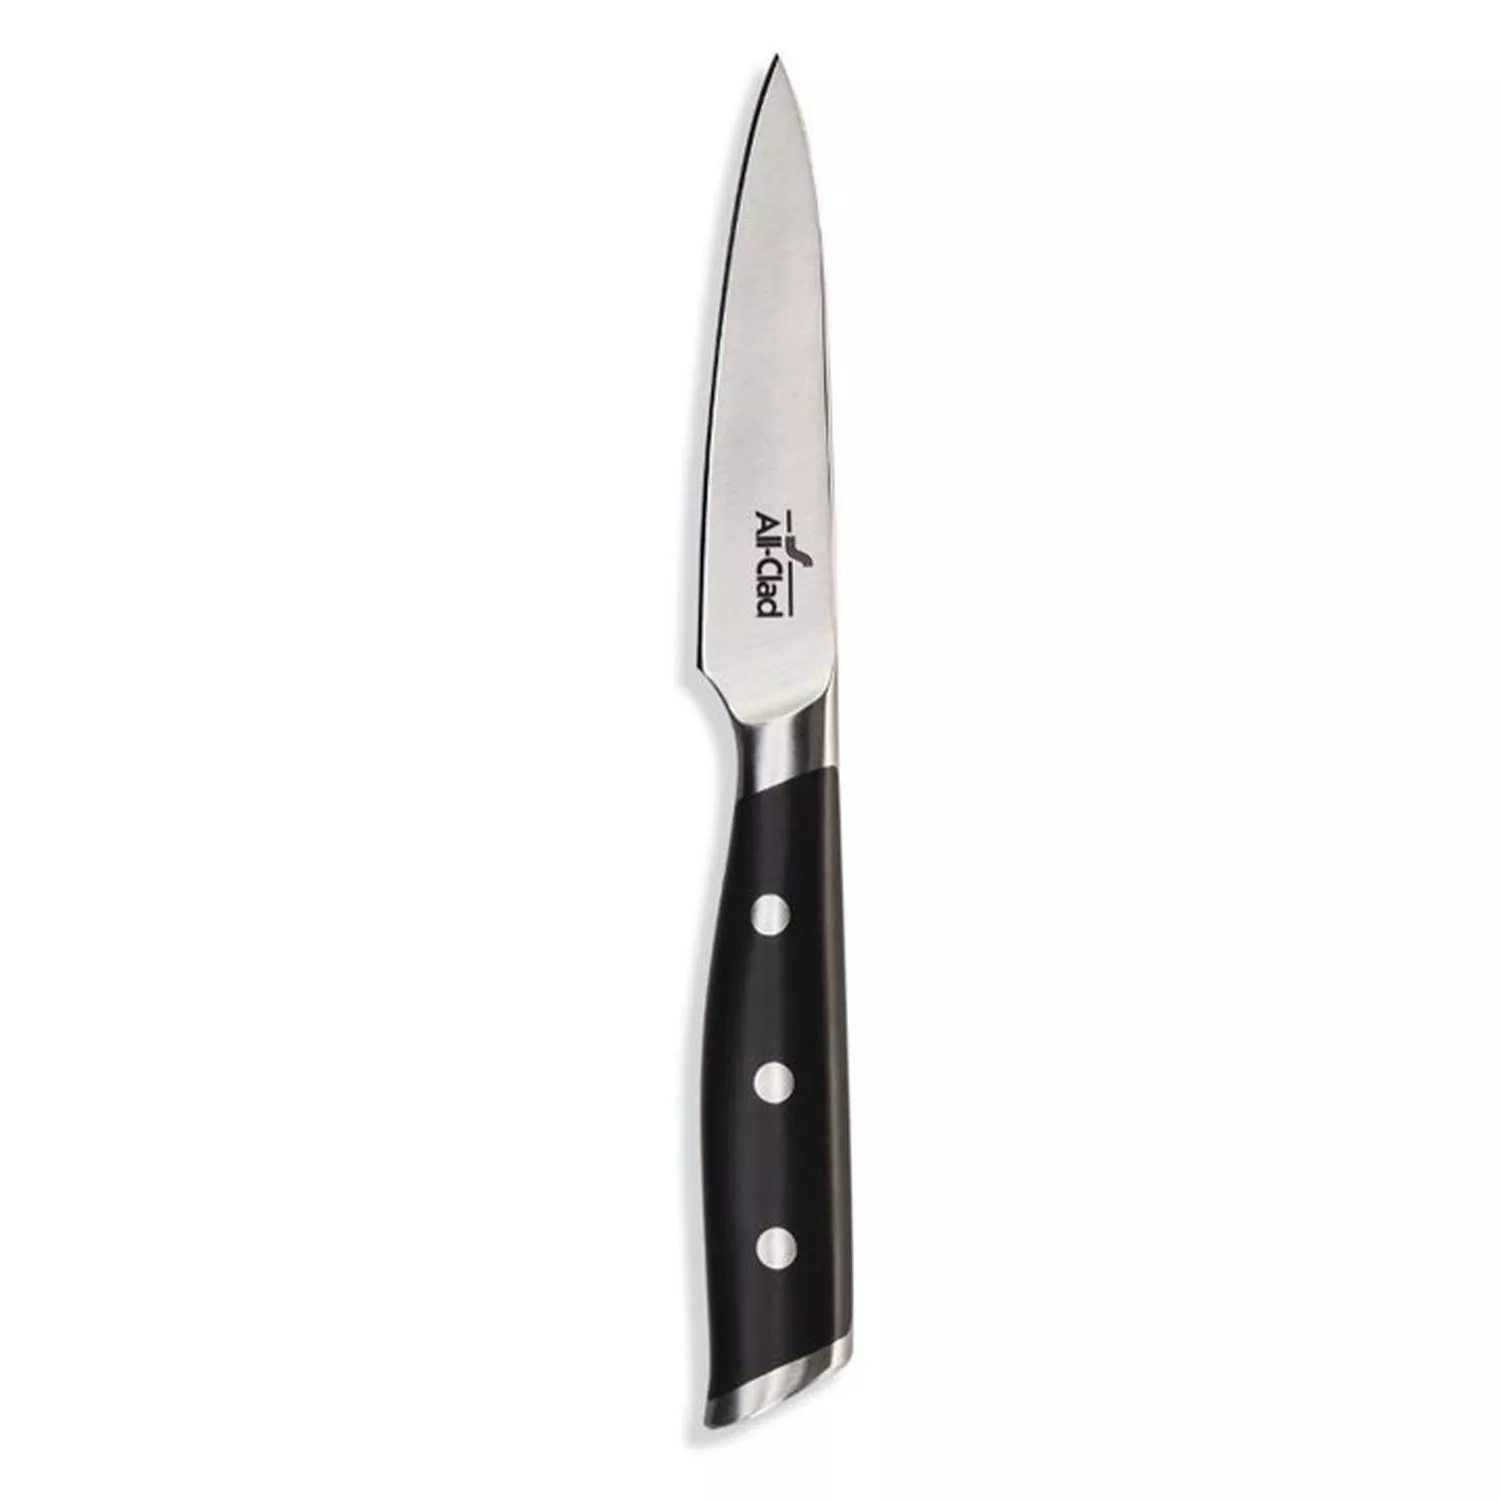 All-Clad Forged 3.5 Paring Knife | Crate & Barrel